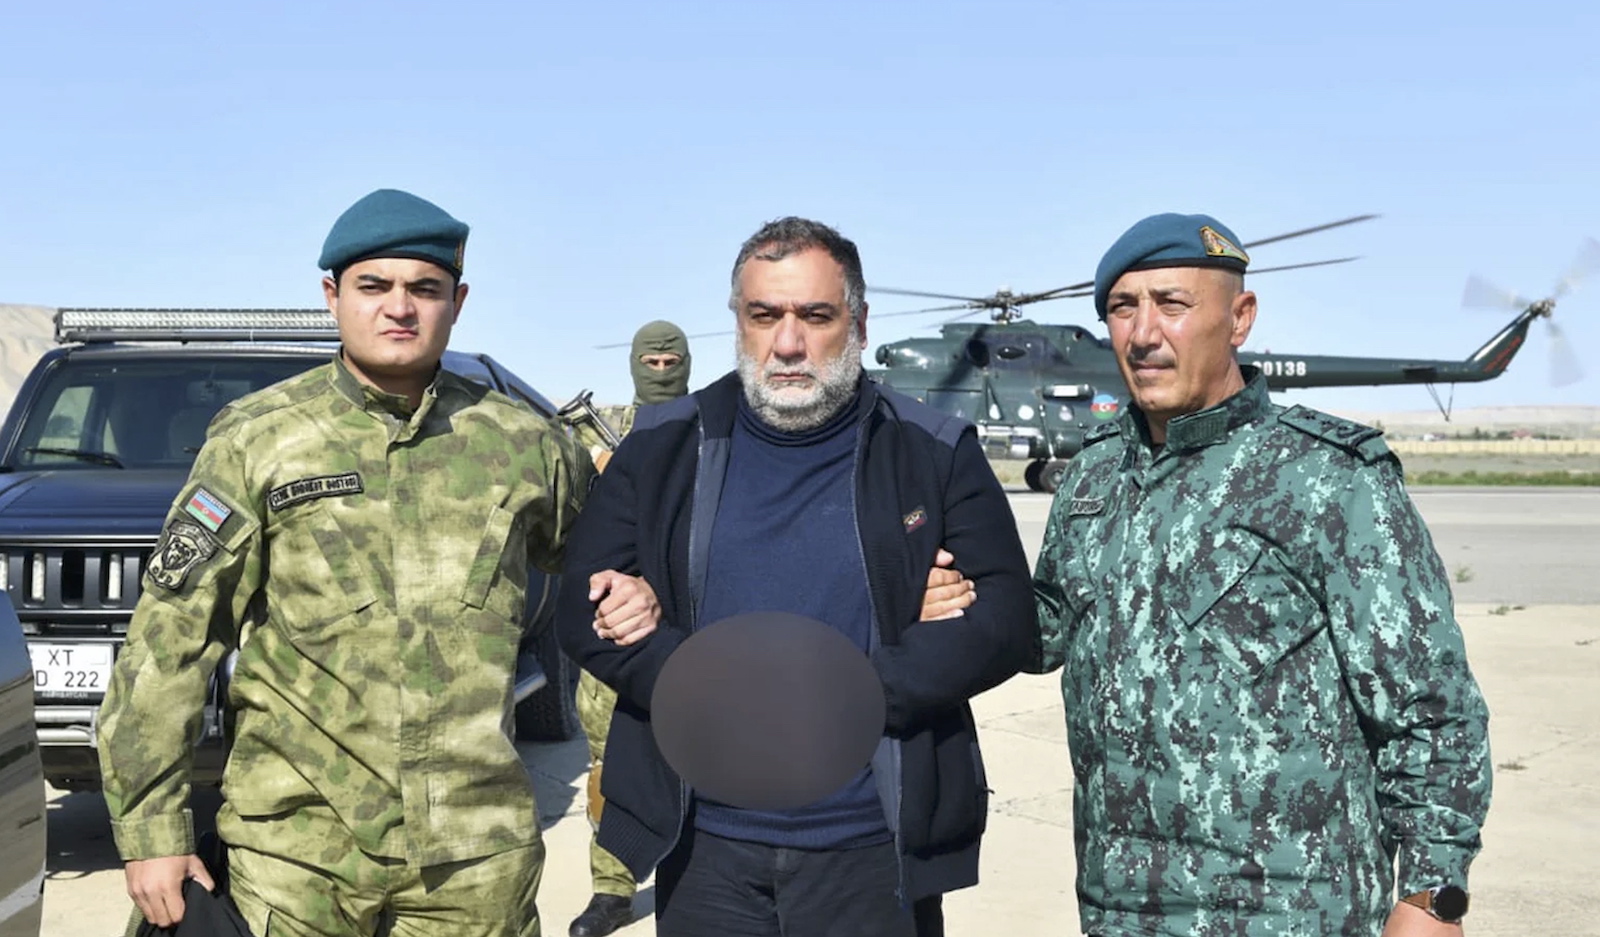 epa10885881 A handout photo made available by the State Border Service of Azerbaijan shows Ruben Vardanyan, a former head of Nagorno-Karabakh, detained by Azerbaijani border guards, Azerbaijan, 27 September 2023. The State Border Service of Azerbaijan detained Vardanyan at the Lachin border checkpoint while trying to leave the territory of Azerbaijan and enter Armenia. In 2022, Russian billionaire Vardanyan announced that he was renouncing Russian citizenship and moving to Nagorno-Karabakh with an Armenian passport. Later, he received the post of head of the government of the Nagorno-Karabakh, and after the start of the blockade of the Lachin corridor (linking Nagorno-Karabakh with Armenia) he was relieved of his post. Until recently, Vardanyan remained in Nagorno-Karabakh. The Government of Armenia has appealed to the European Court of Human Rights (ECHR) on the issue of ensuring the protection of the ex-Minister of State of Nagorno-Karabakh and former head of the Troika Dialog company Ruben Vardanyan.  EPA/STATE BORDER SERVICE OF AZERBAIJAN / HANDOUT  HANDOUT EDITORIAL USE ONLY/NO SALES